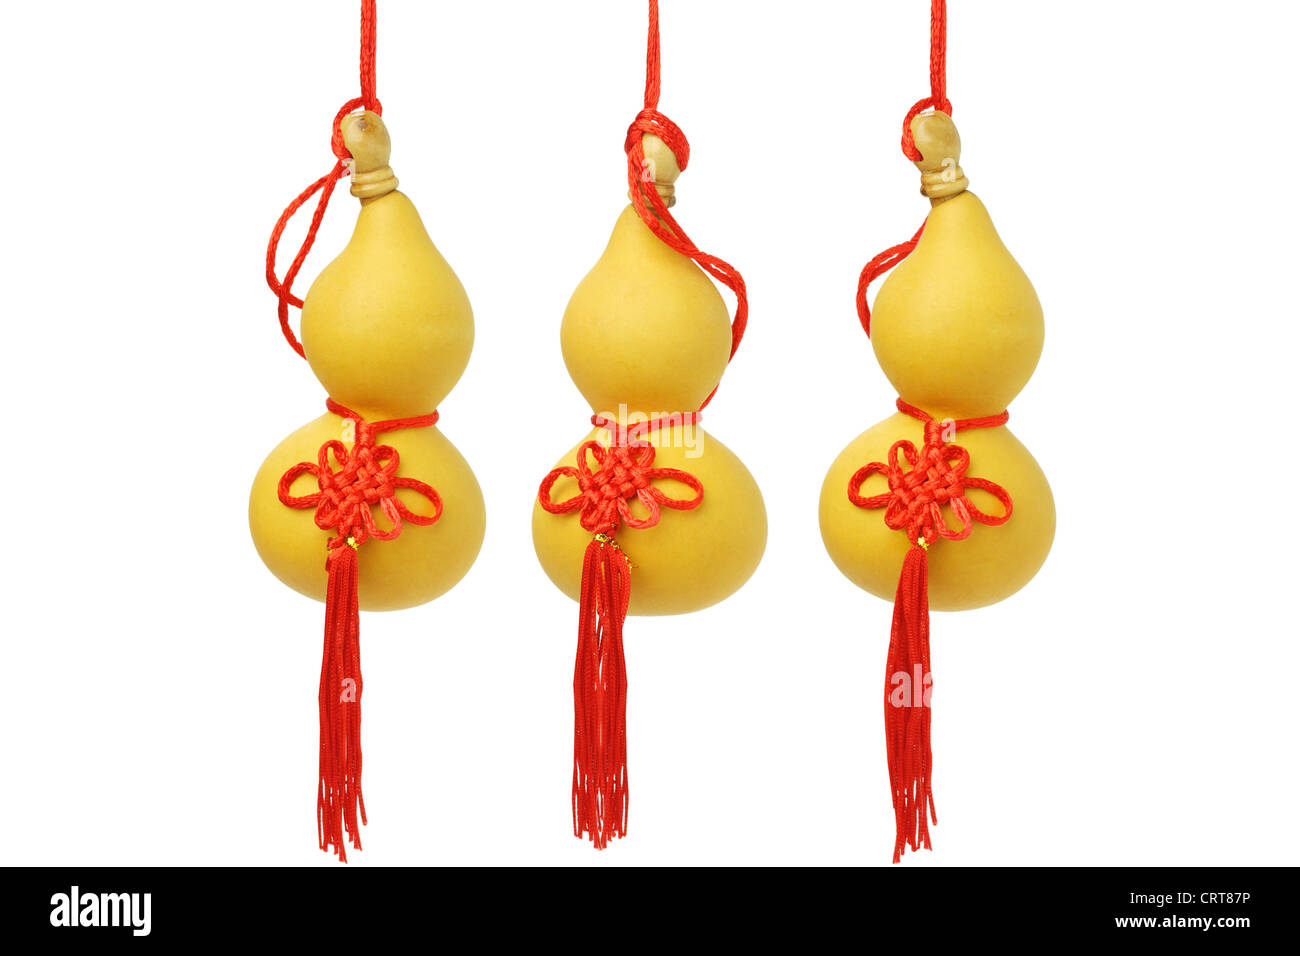 Chinese New Year Bottle Gourd Ornaments on White Background Stock Photo